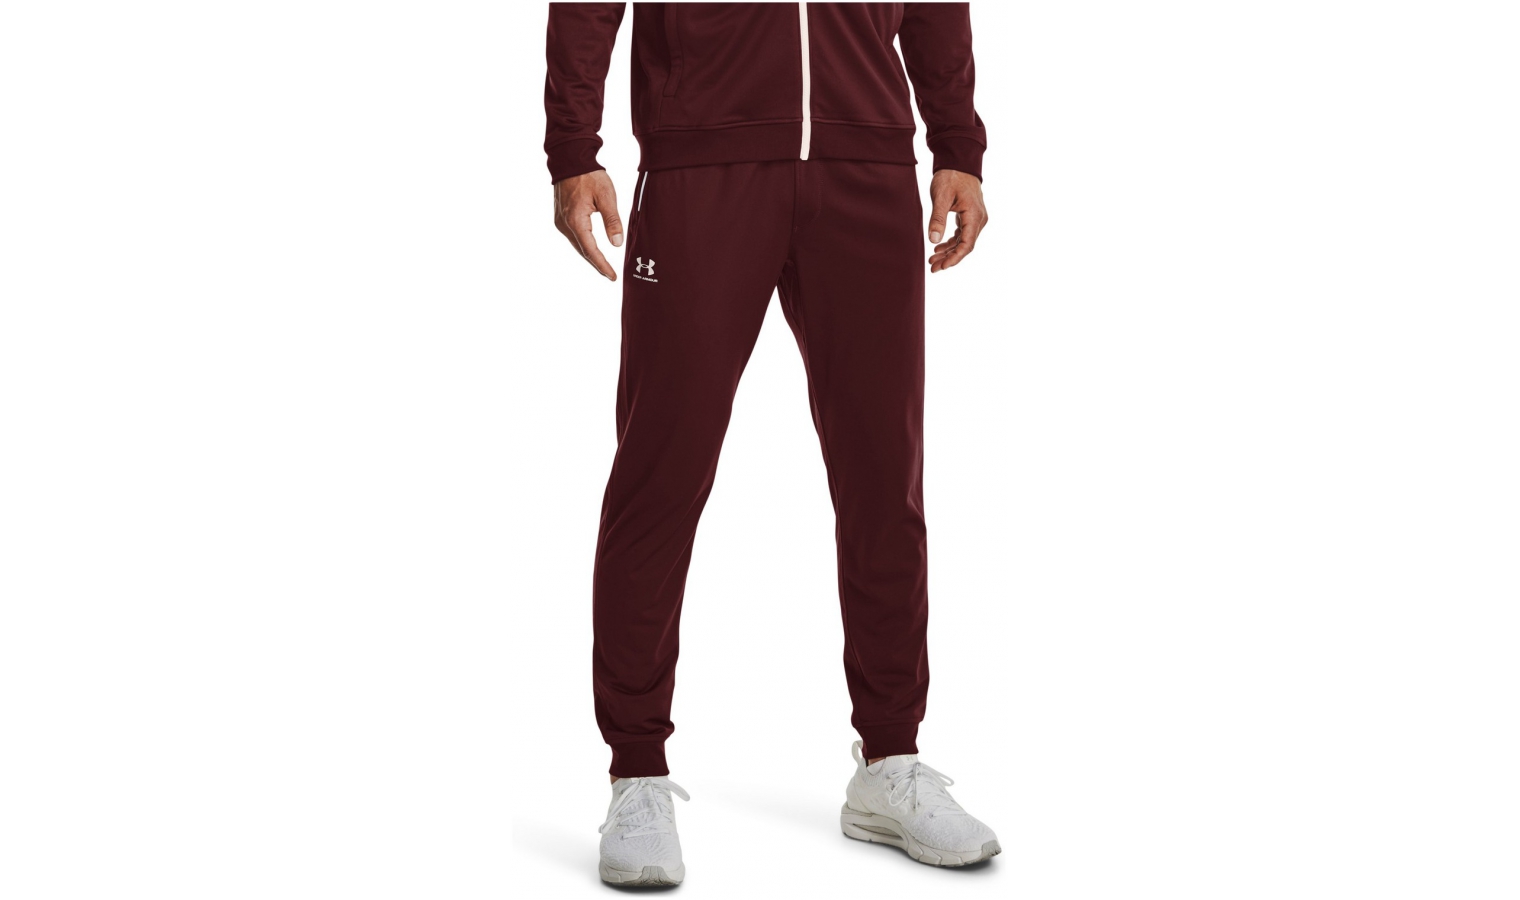 NWT UNDER ARMOUR Men's UA Sportstyle Elite Joggers 1376965 664 Berry RED XL